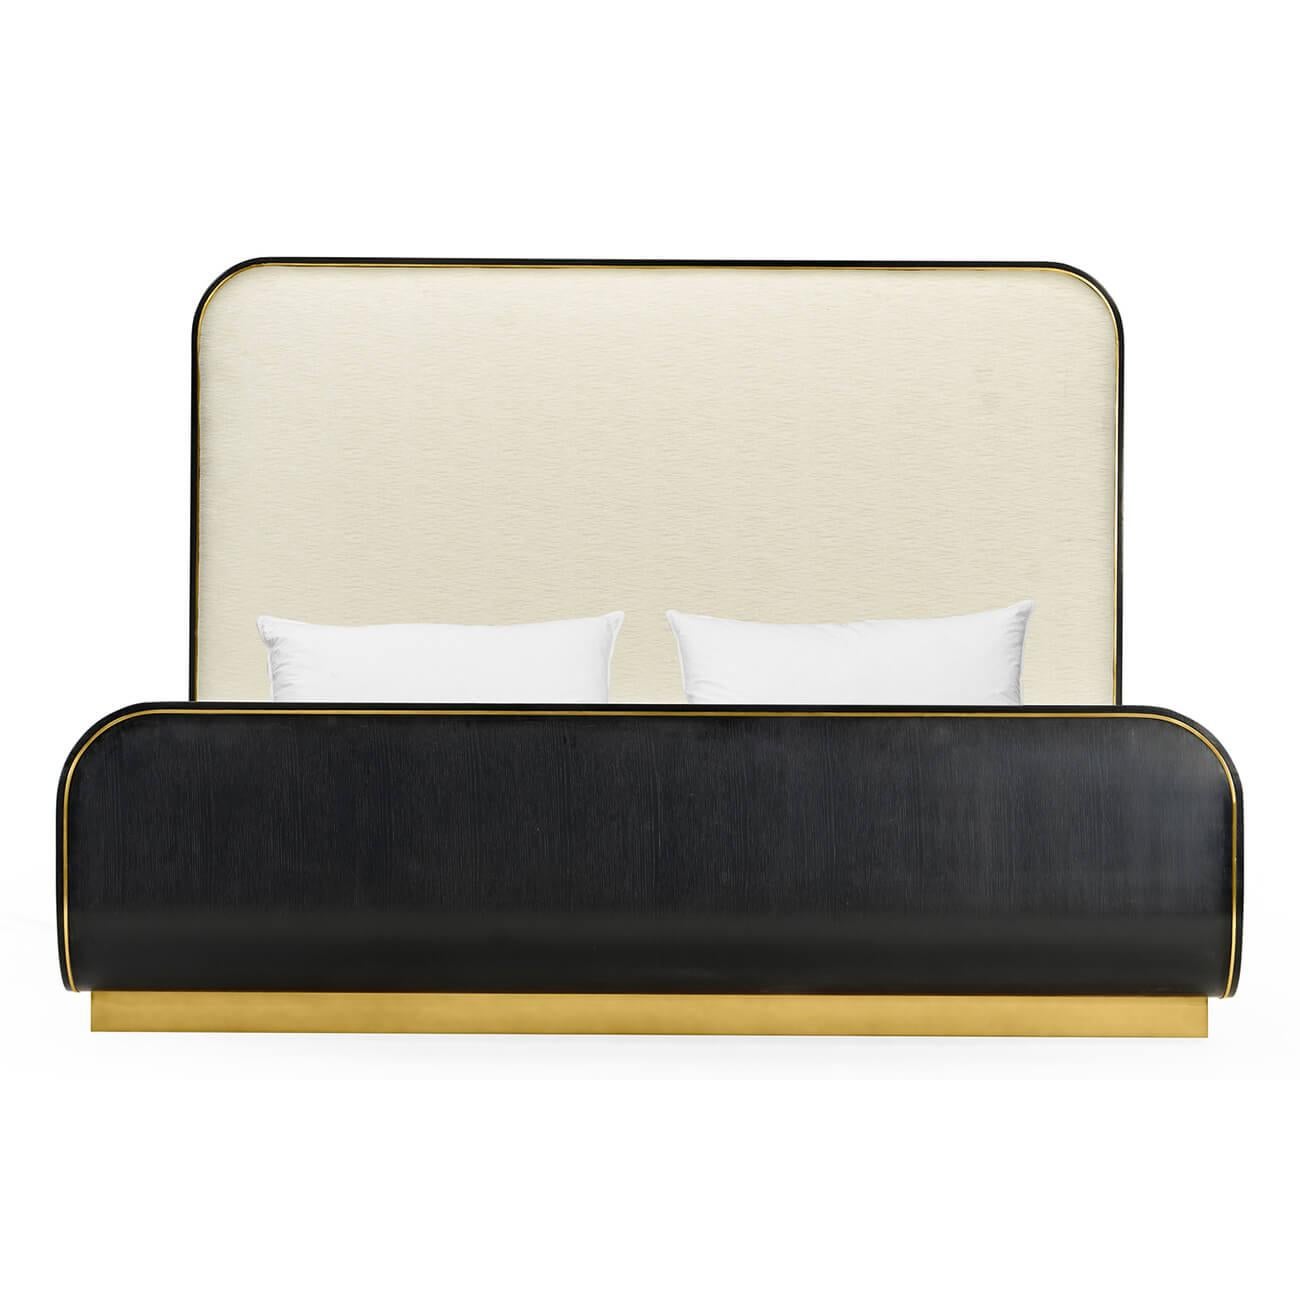 A Mid-Century Modern style king size bed with an ebonized oak frame with curved ends, brass trim and brass-mounted plinth base, and upholstered headboards and side rails.

Dimensions: 83 1/8